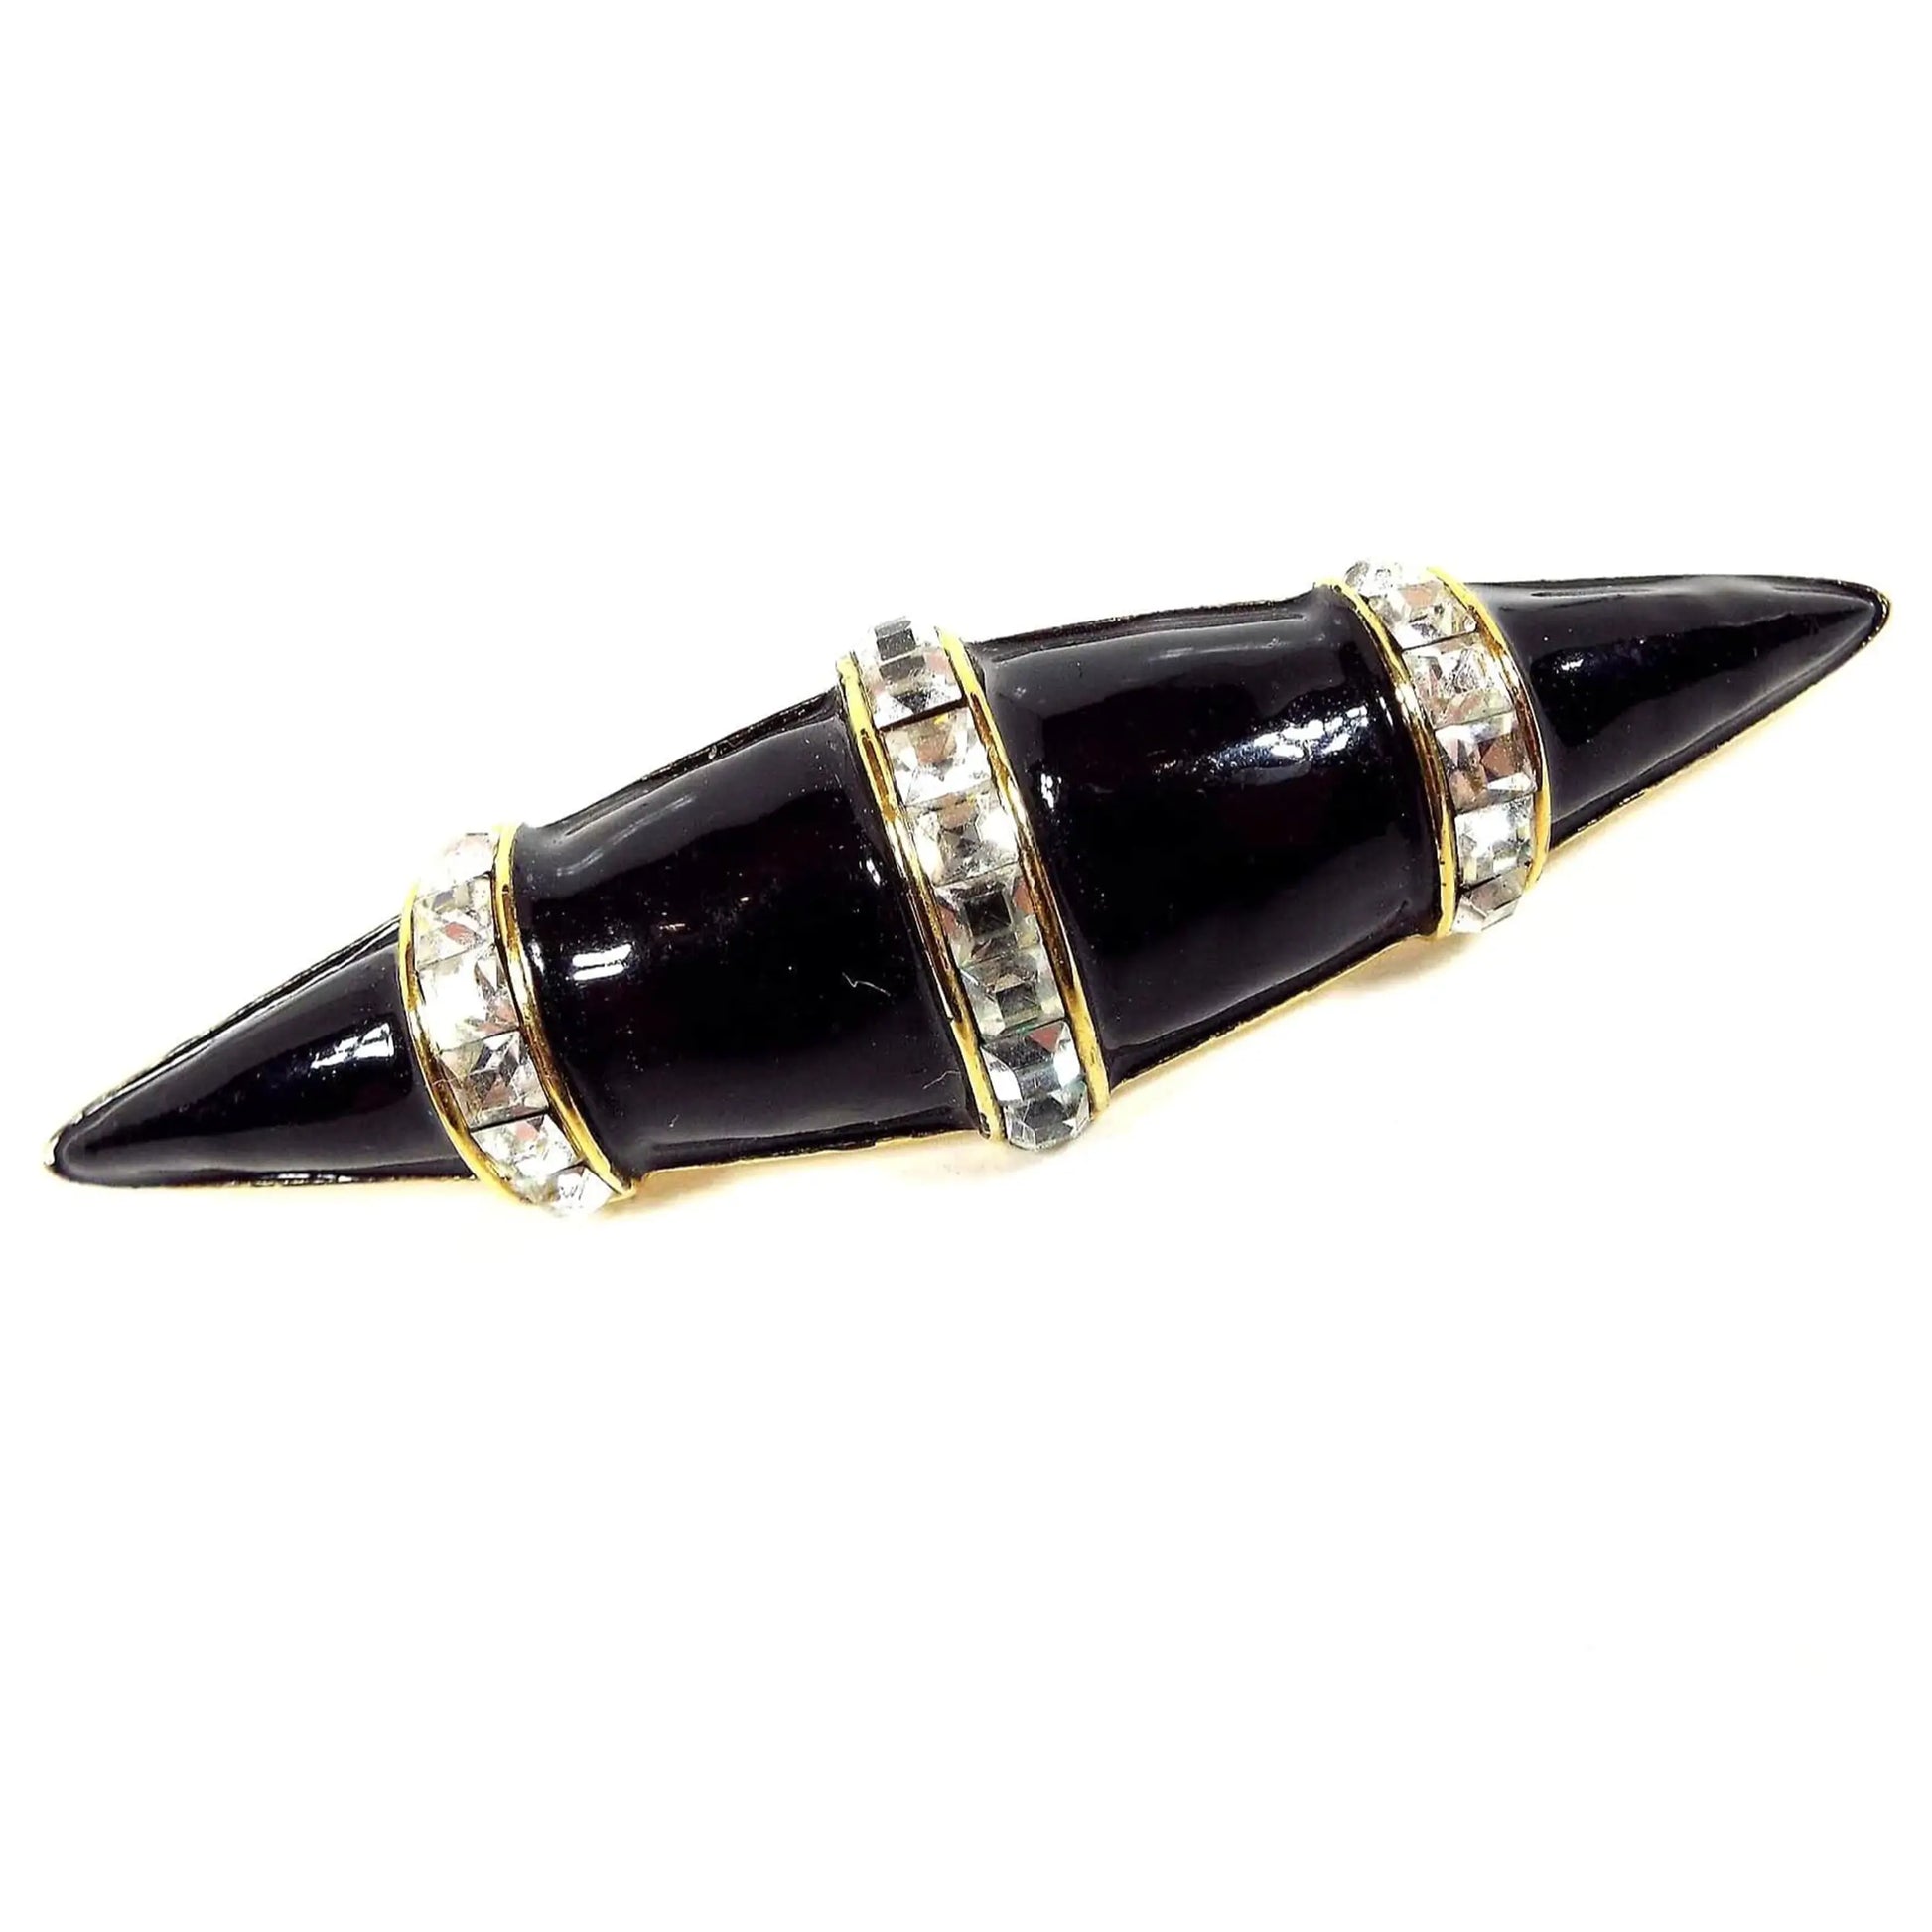 Front view of the retro vintage brooch pin. The metal is gold tone in color and it's shaped like an elongated oval with pointed edges. There are three bands of square clear rhinestones over the domed top. In between the bands and on the ends is black enameled.